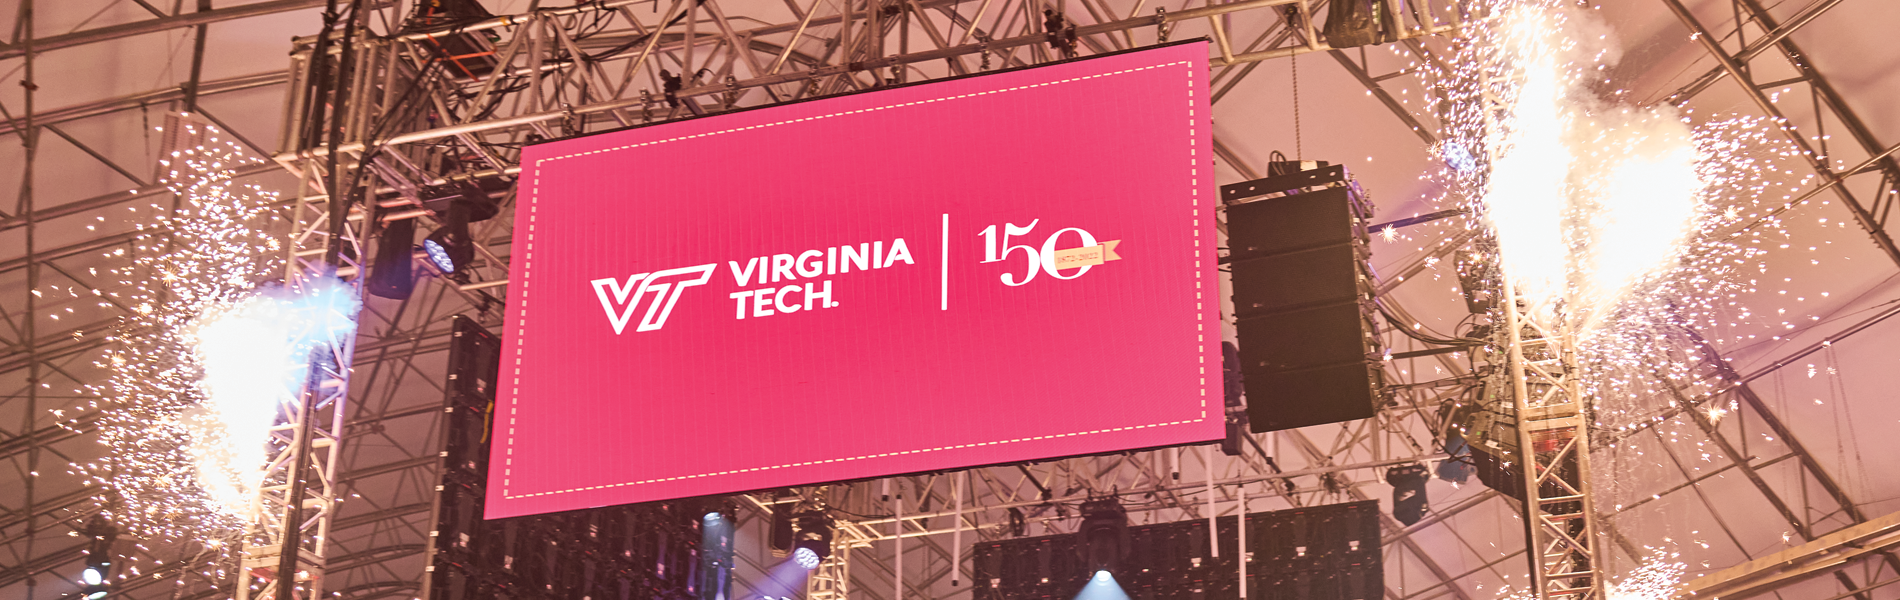 Level5 Events by The Expo Group teamed up with Virginia Tech to produce a successful 150 Year Anniversary celebration